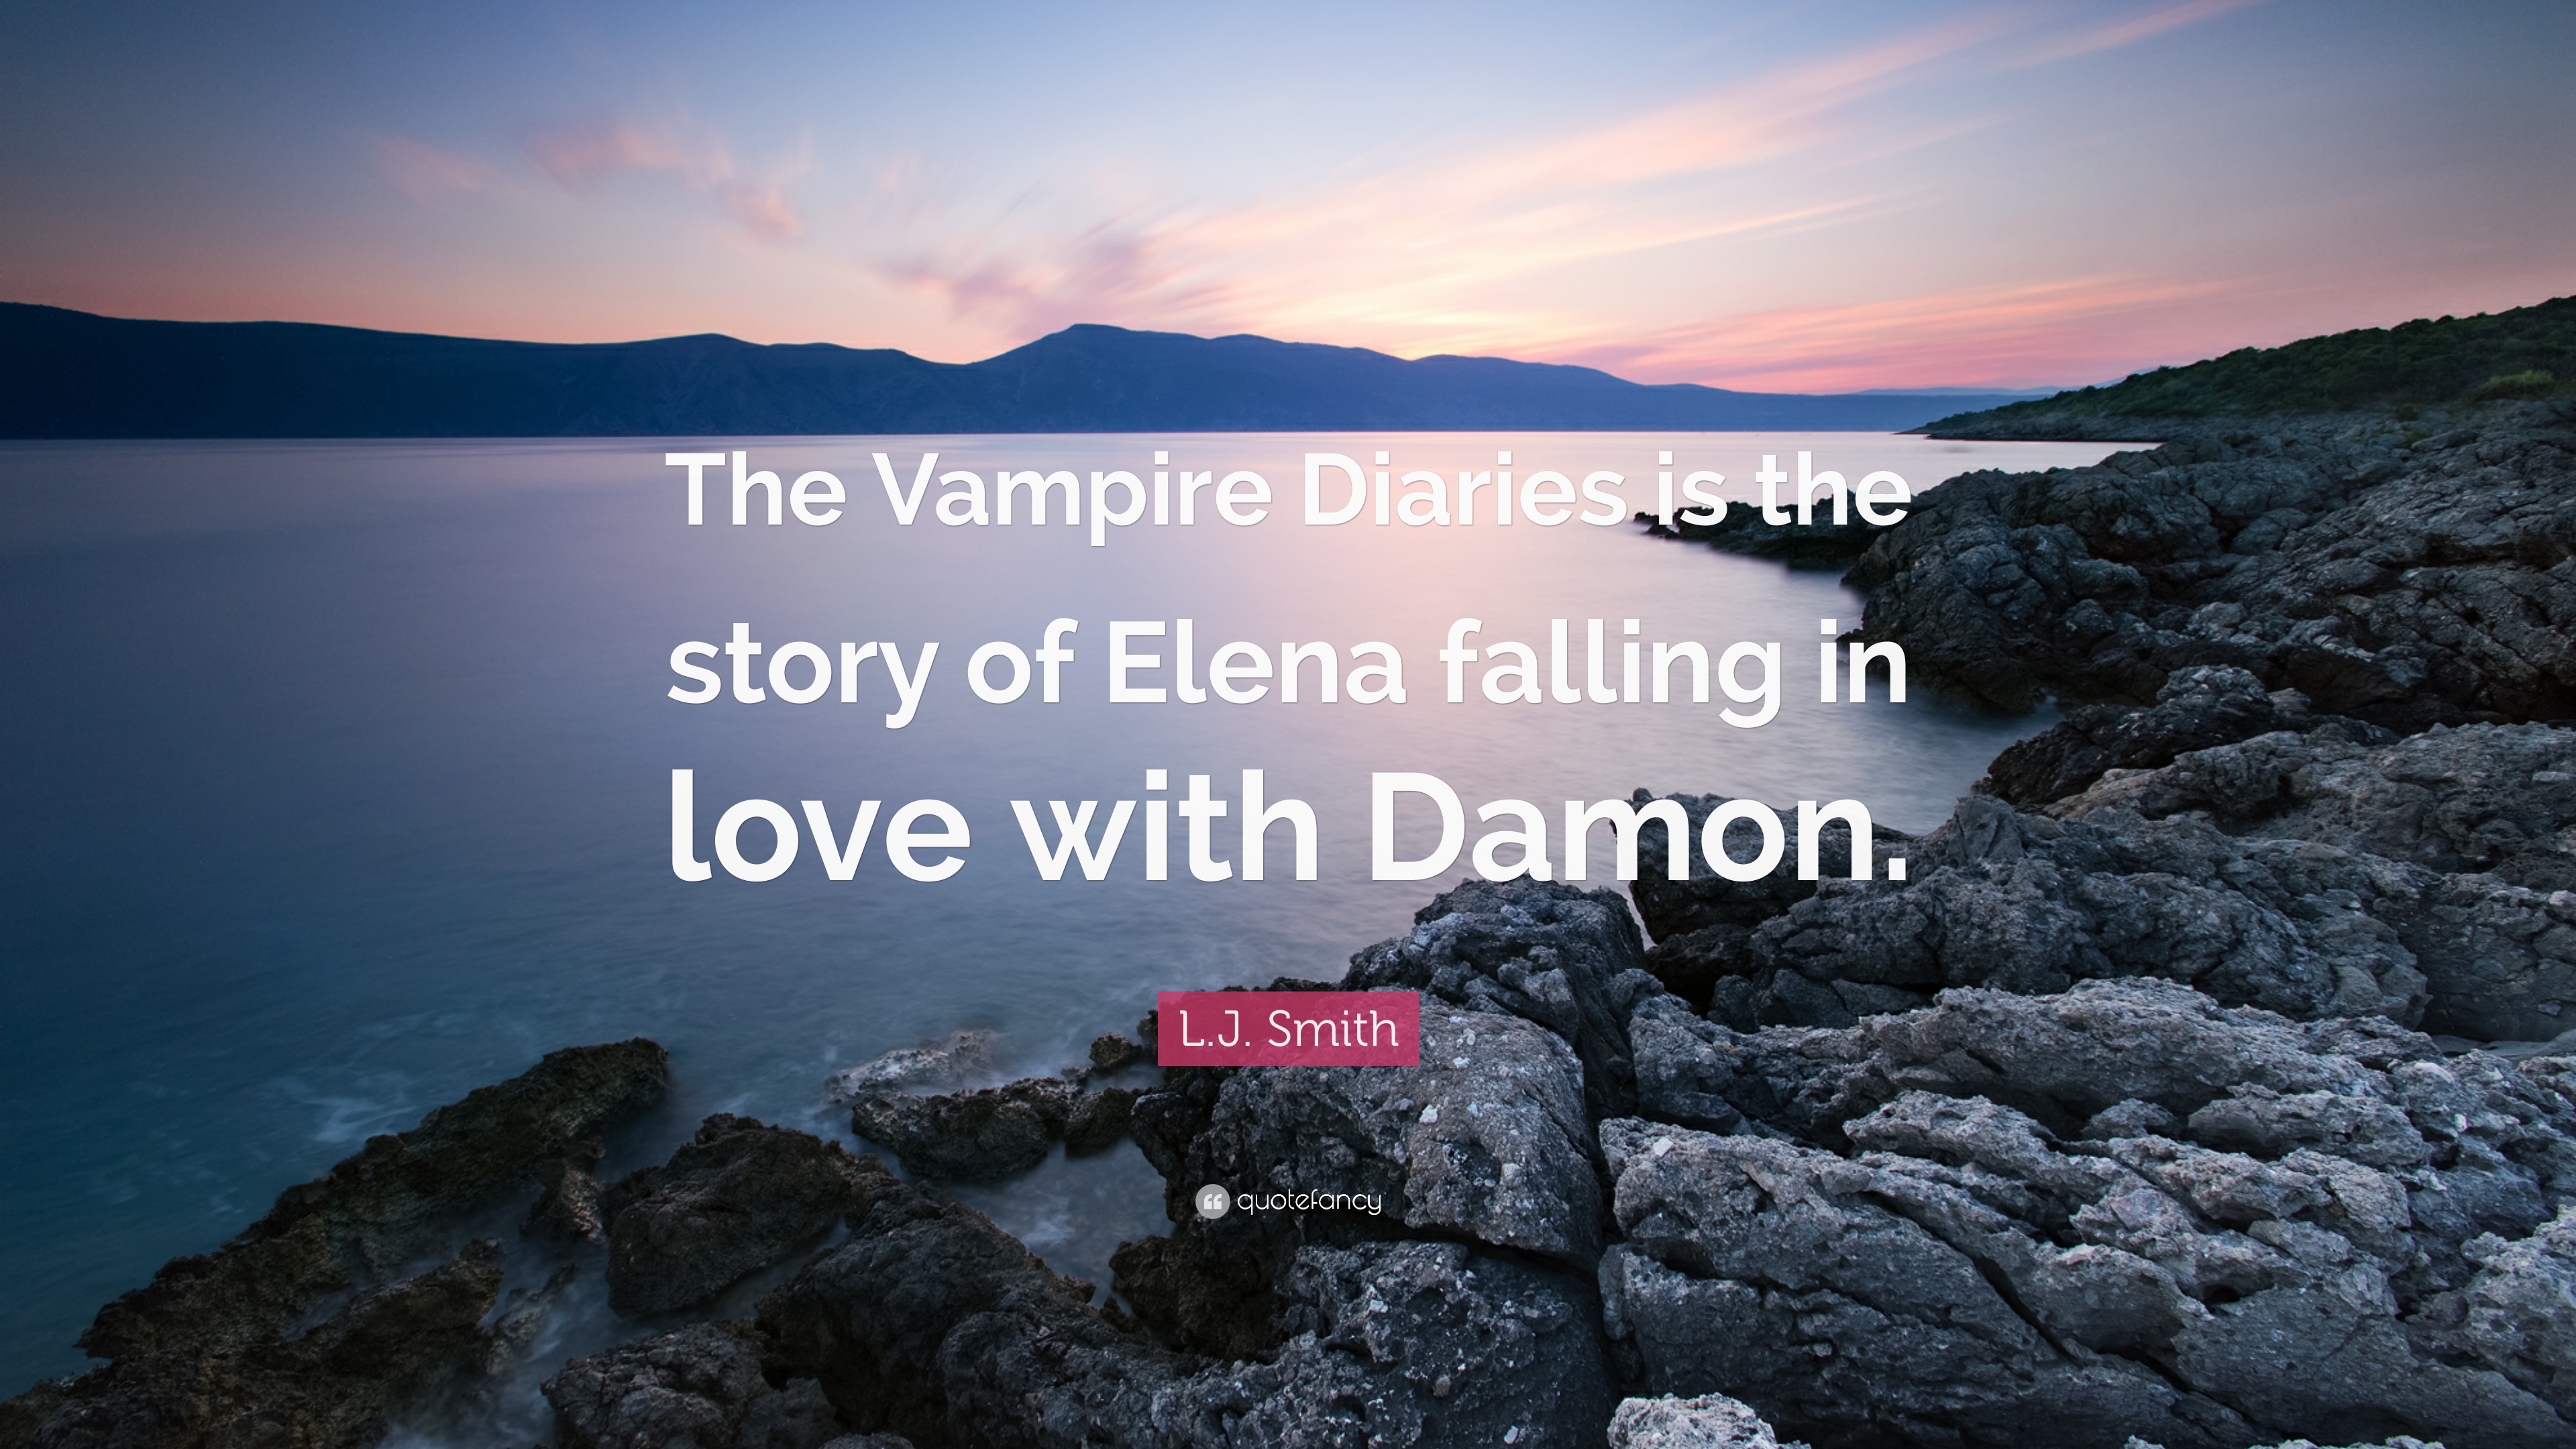 L.J. Smith Quote: “The Vampire Diaries is the story of Elena